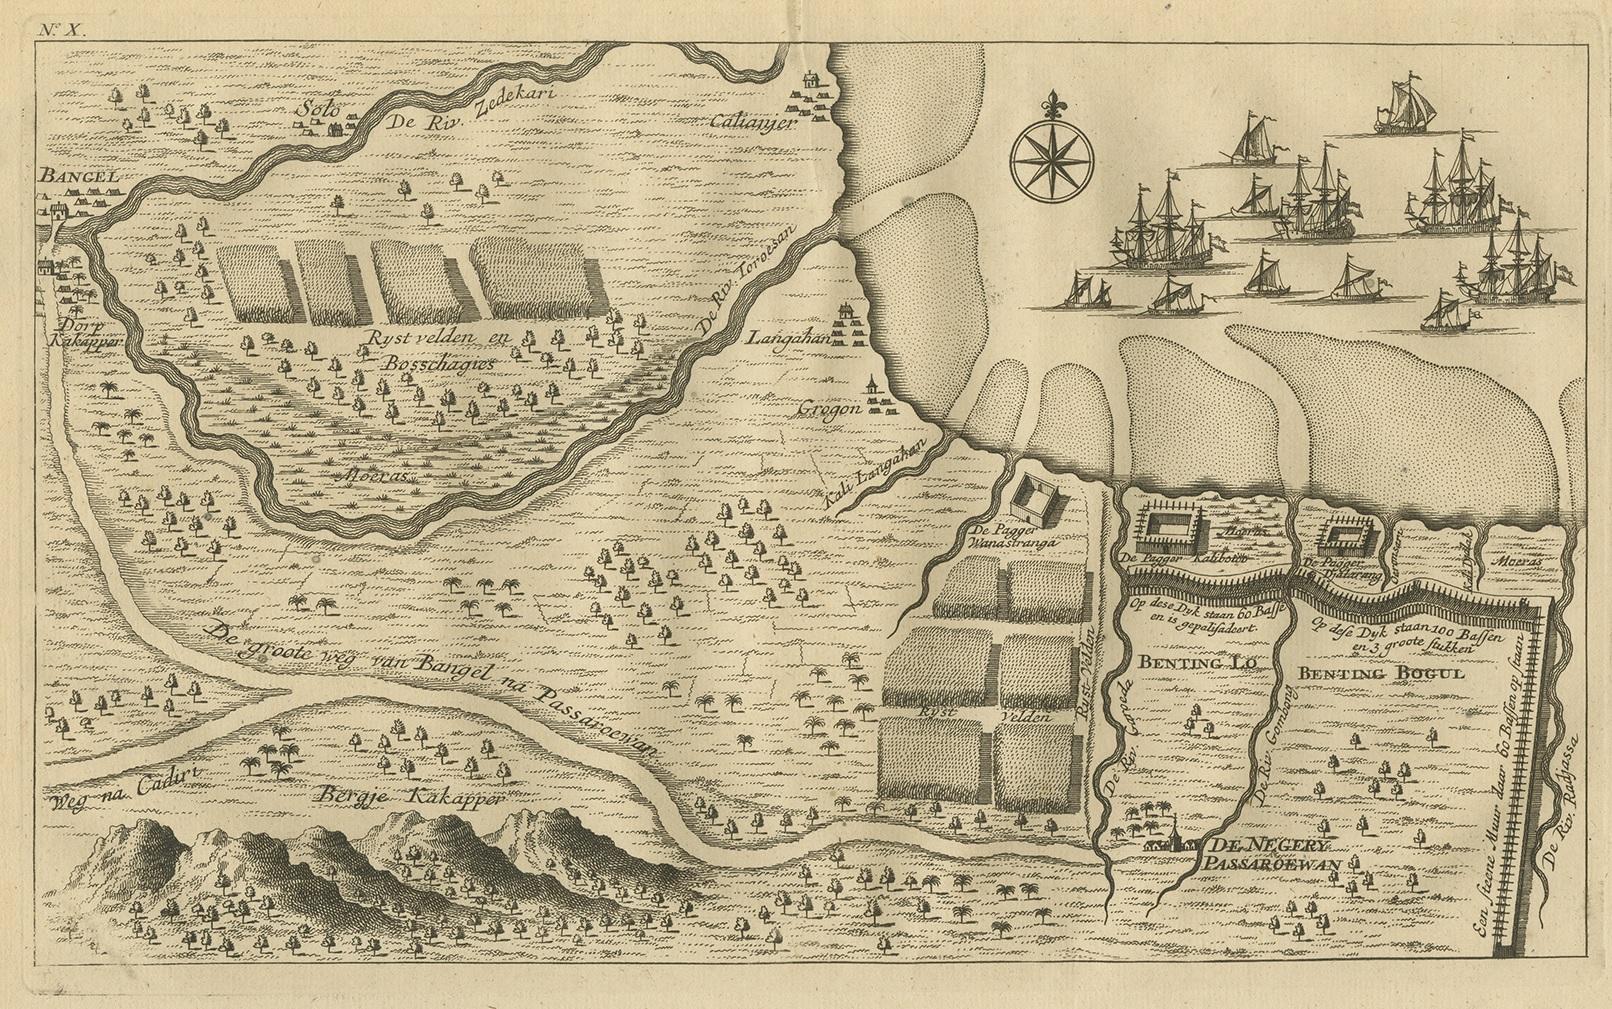 Antique print of the region around Pasuruan near Surabaya, Indonesia. It shows the location of rice fields, the village Bangil, as well as three places named Pagger (also Pagar), a cluster of buildings surrounded by a bamboo fence. The location of a